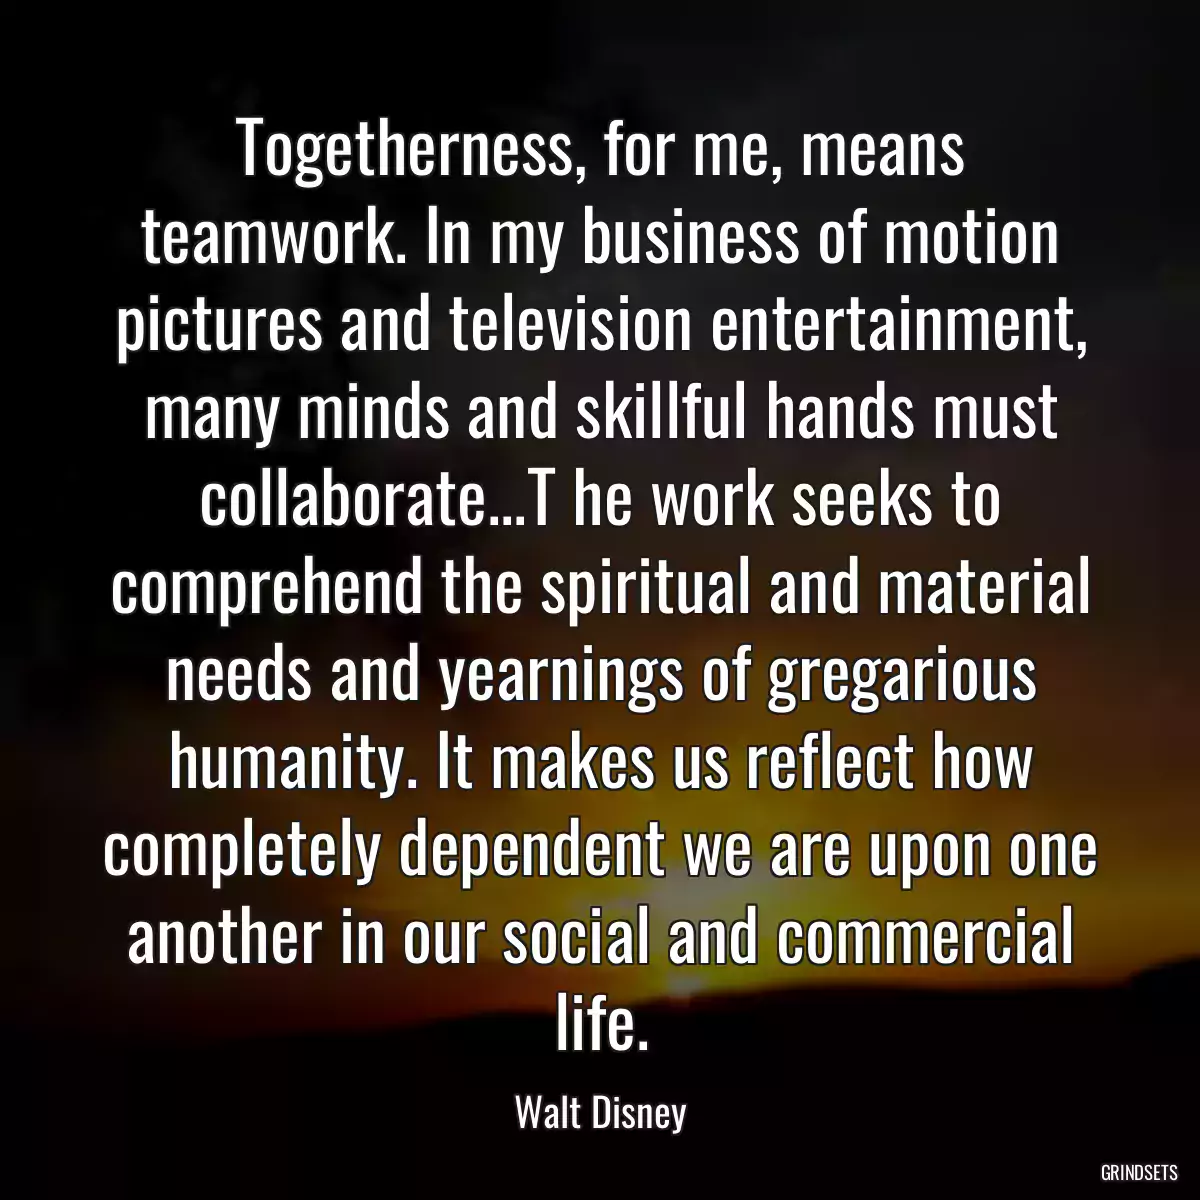 Togetherness, for me, means teamwork. In my business of motion pictures and television entertainment, many minds and skillful hands must collaborate...T he work seeks to comprehend the spiritual and material needs and yearnings of gregarious humanity. It makes us reflect how completely dependent we are upon one another in our social and commercial life.